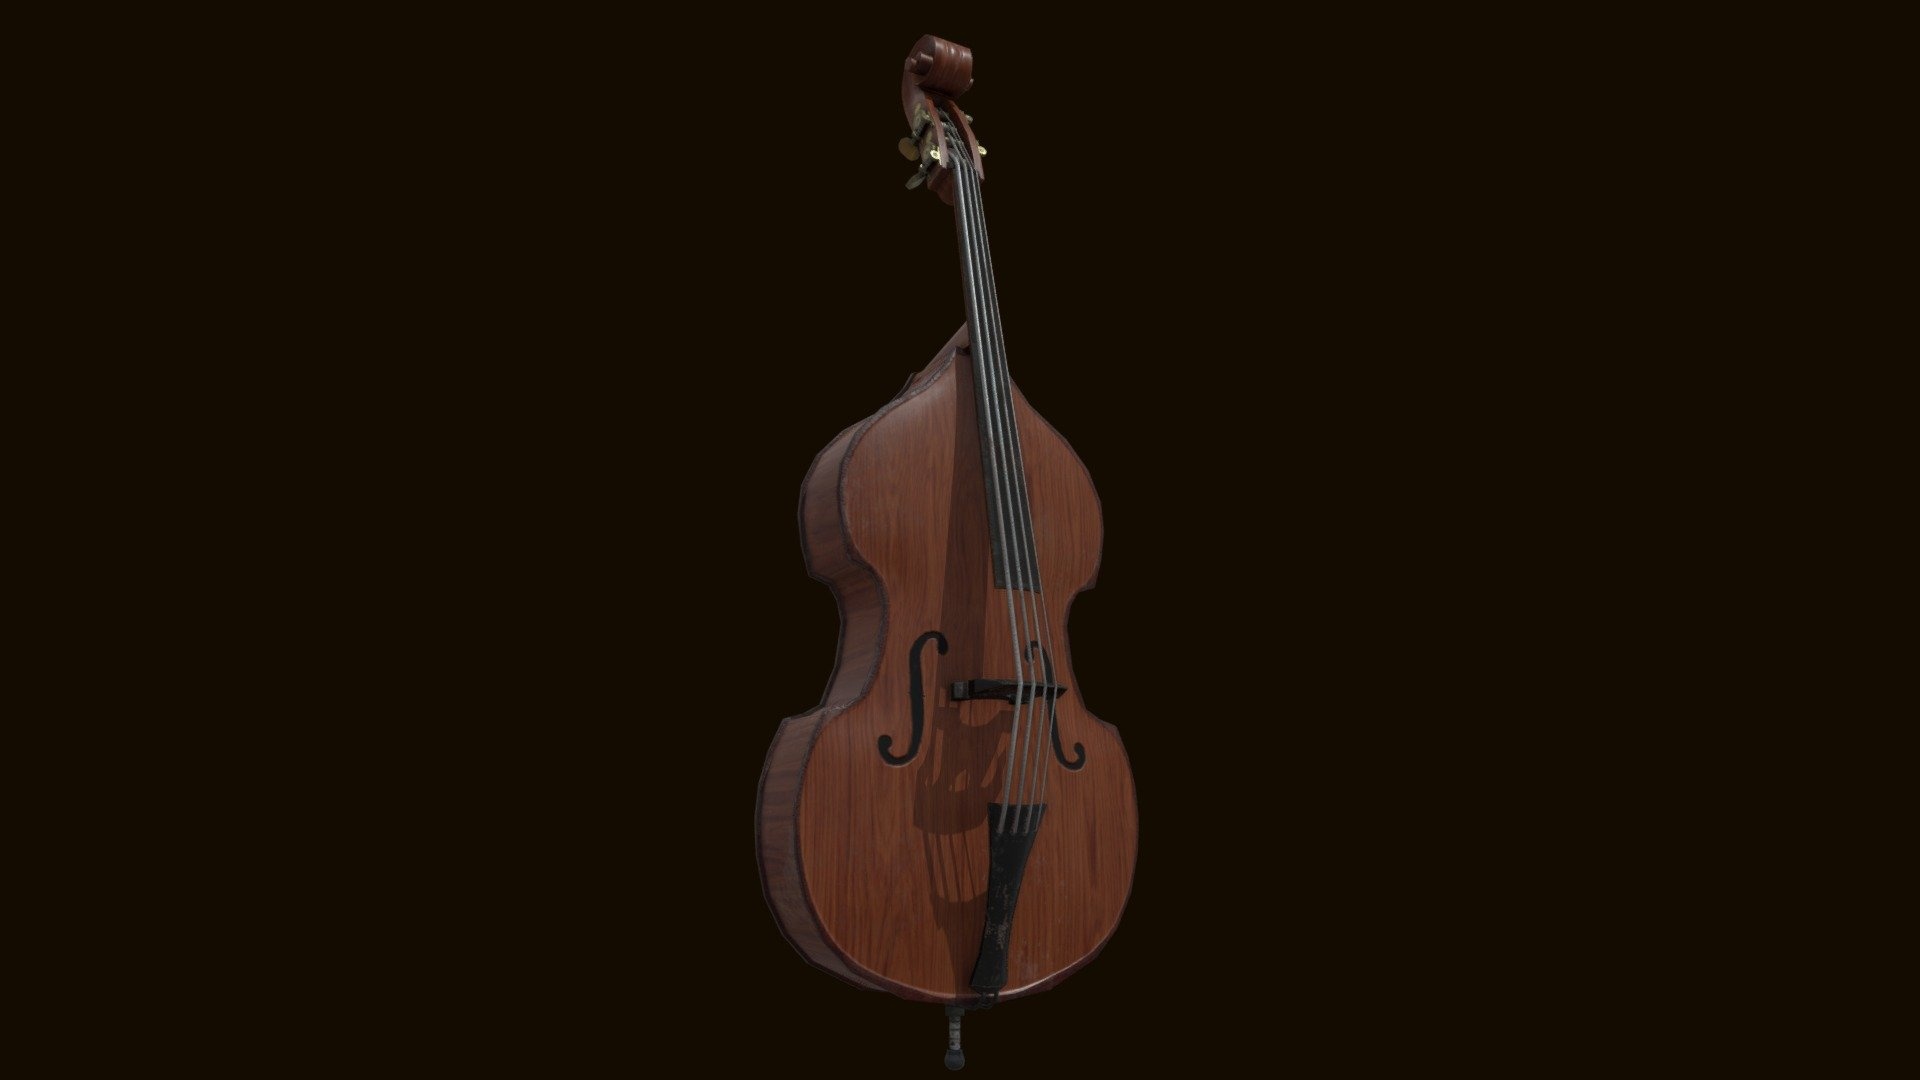 Double Bass: 3D Model Of The Bass, Plucked String Instruments. 1920x1080 Full HD Background.